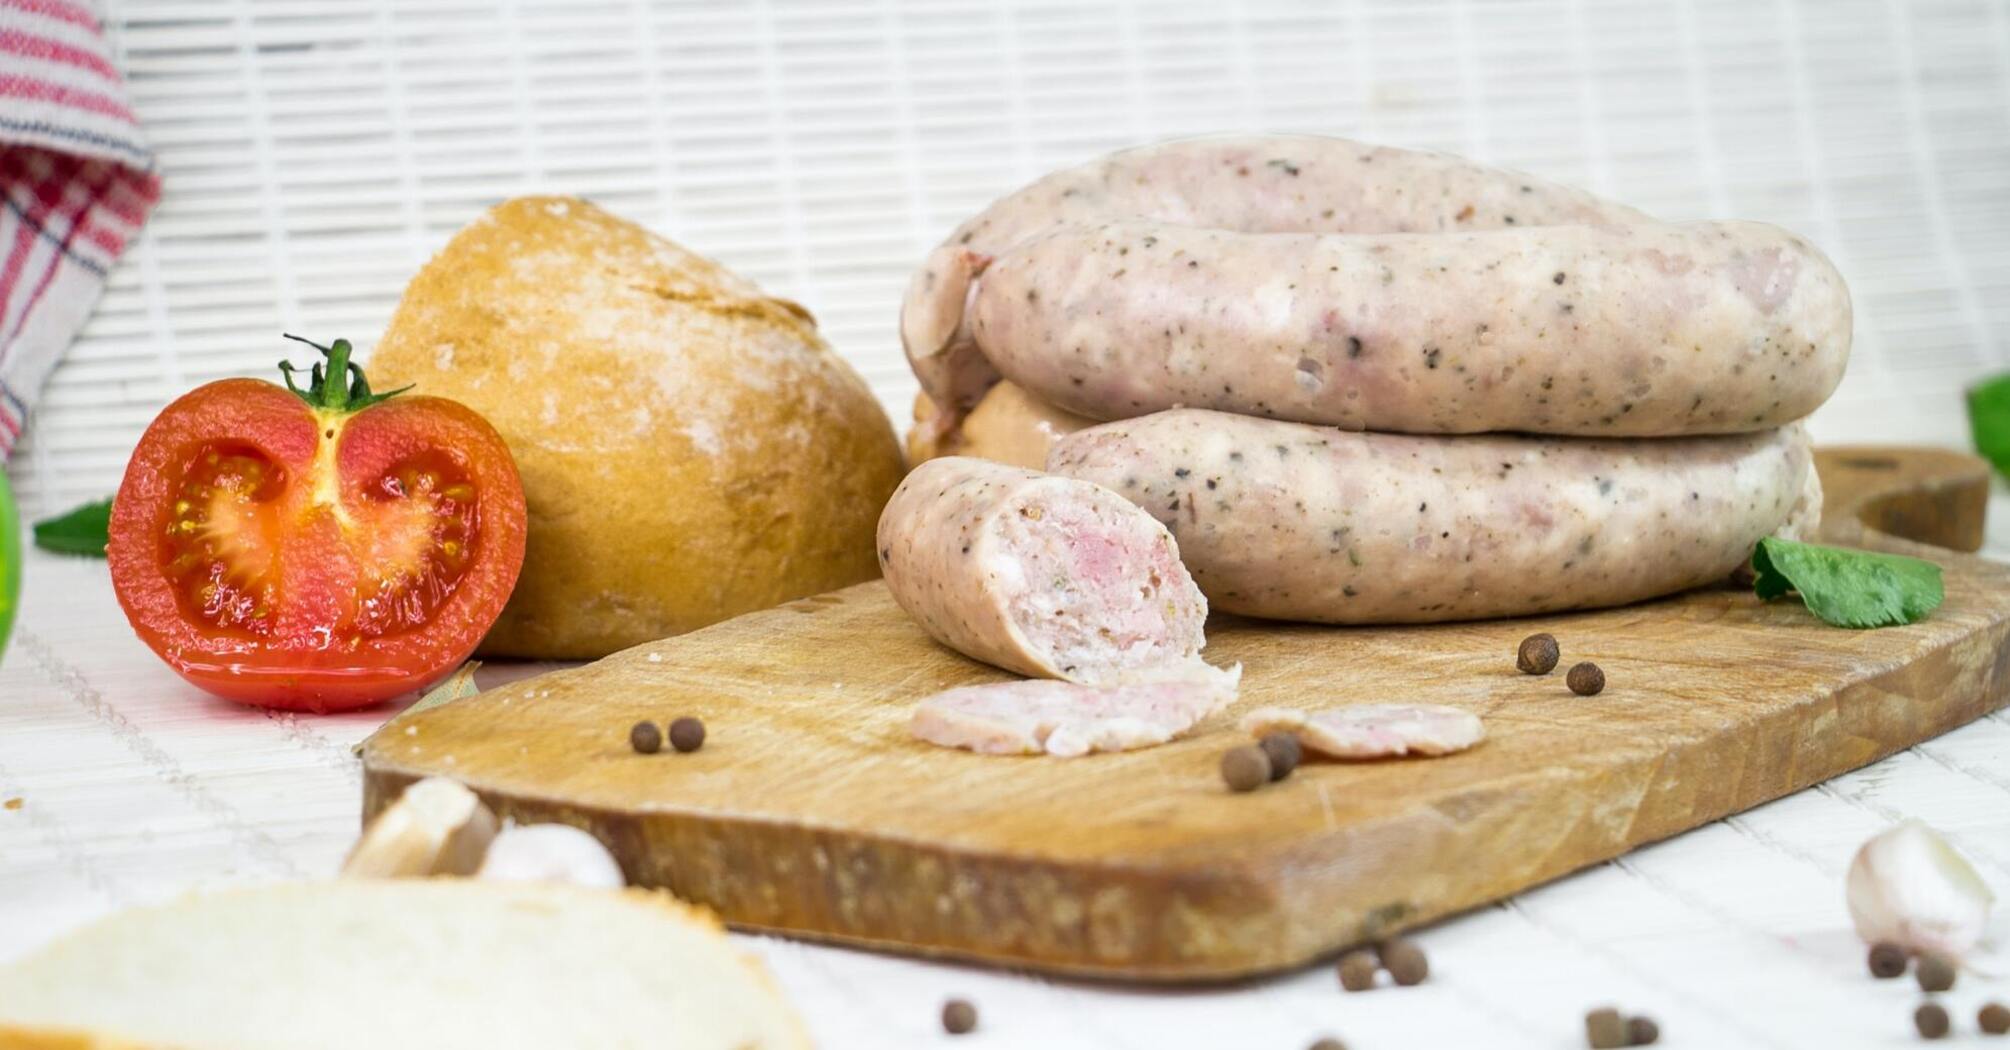 Homemade sausages for children